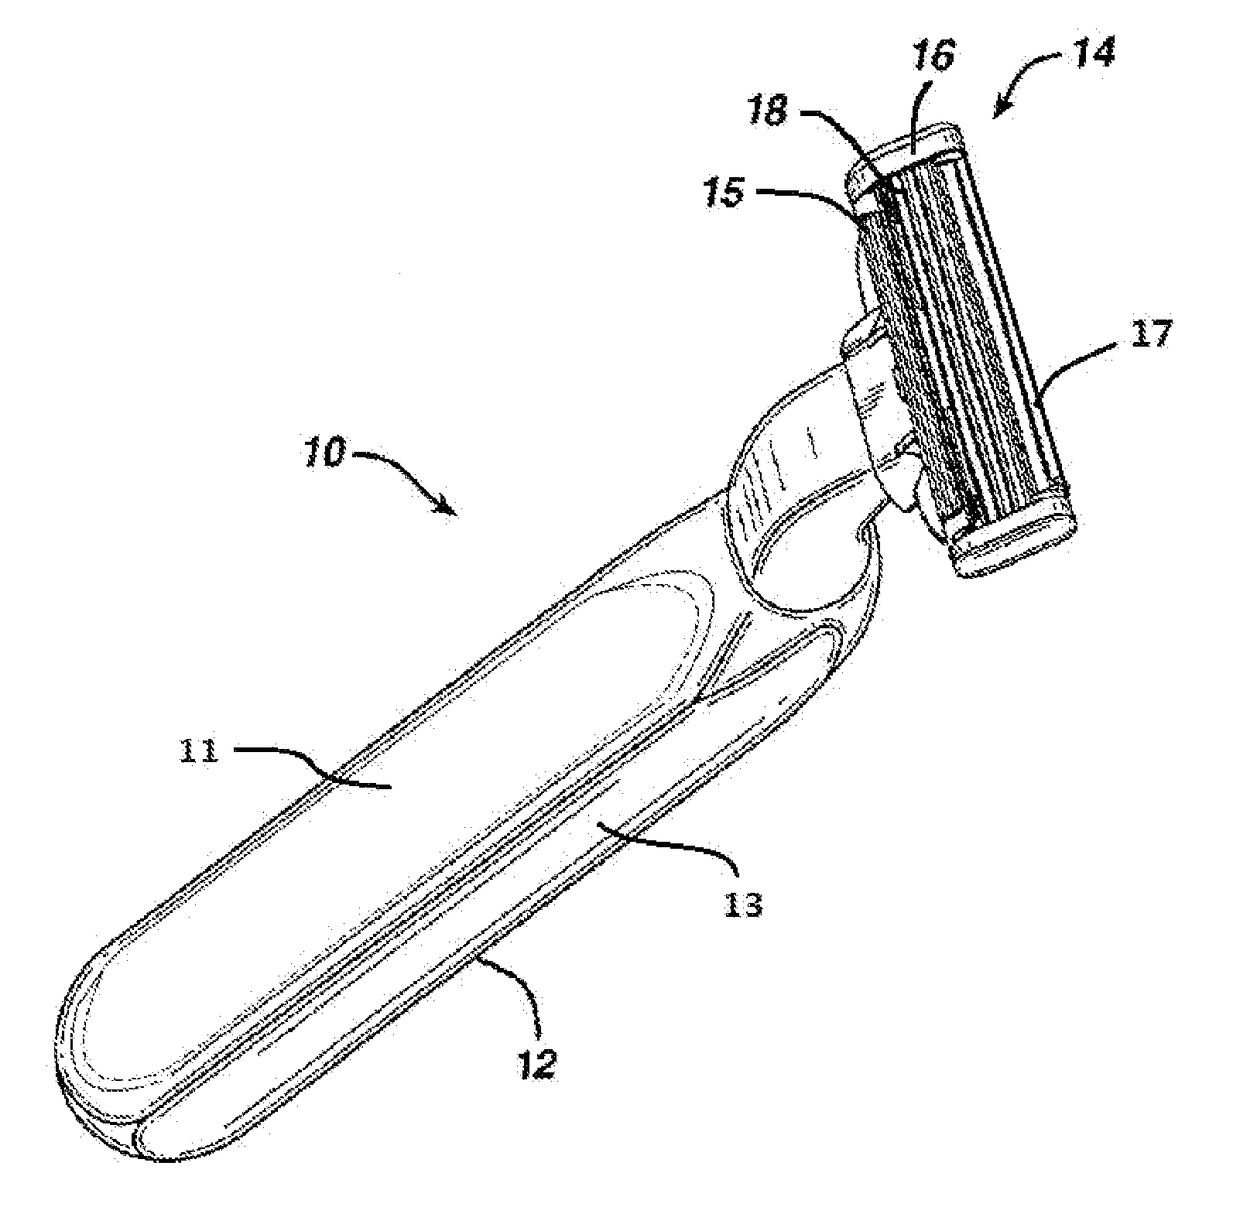 Handle for shaving device comprising a thermochromic material